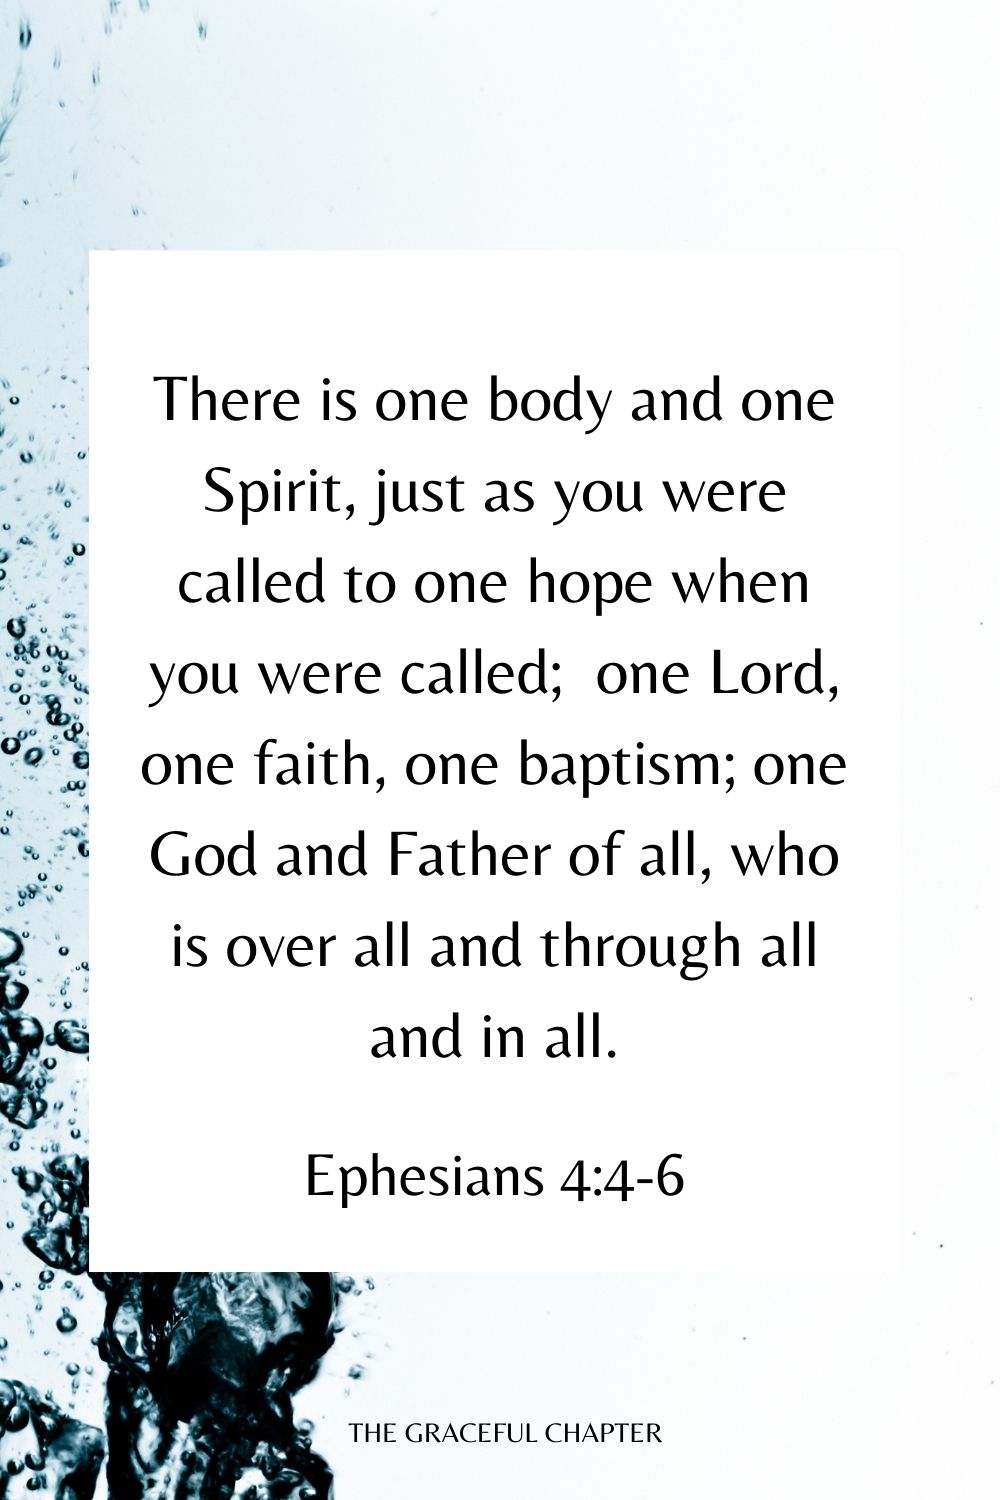 There is one body and one Spirit, just as you were called to one hope when you were called;  one Lord, one faith, one baptism; one God and Father of all, who is over all and through all and in all. Ephesians 4:4-6